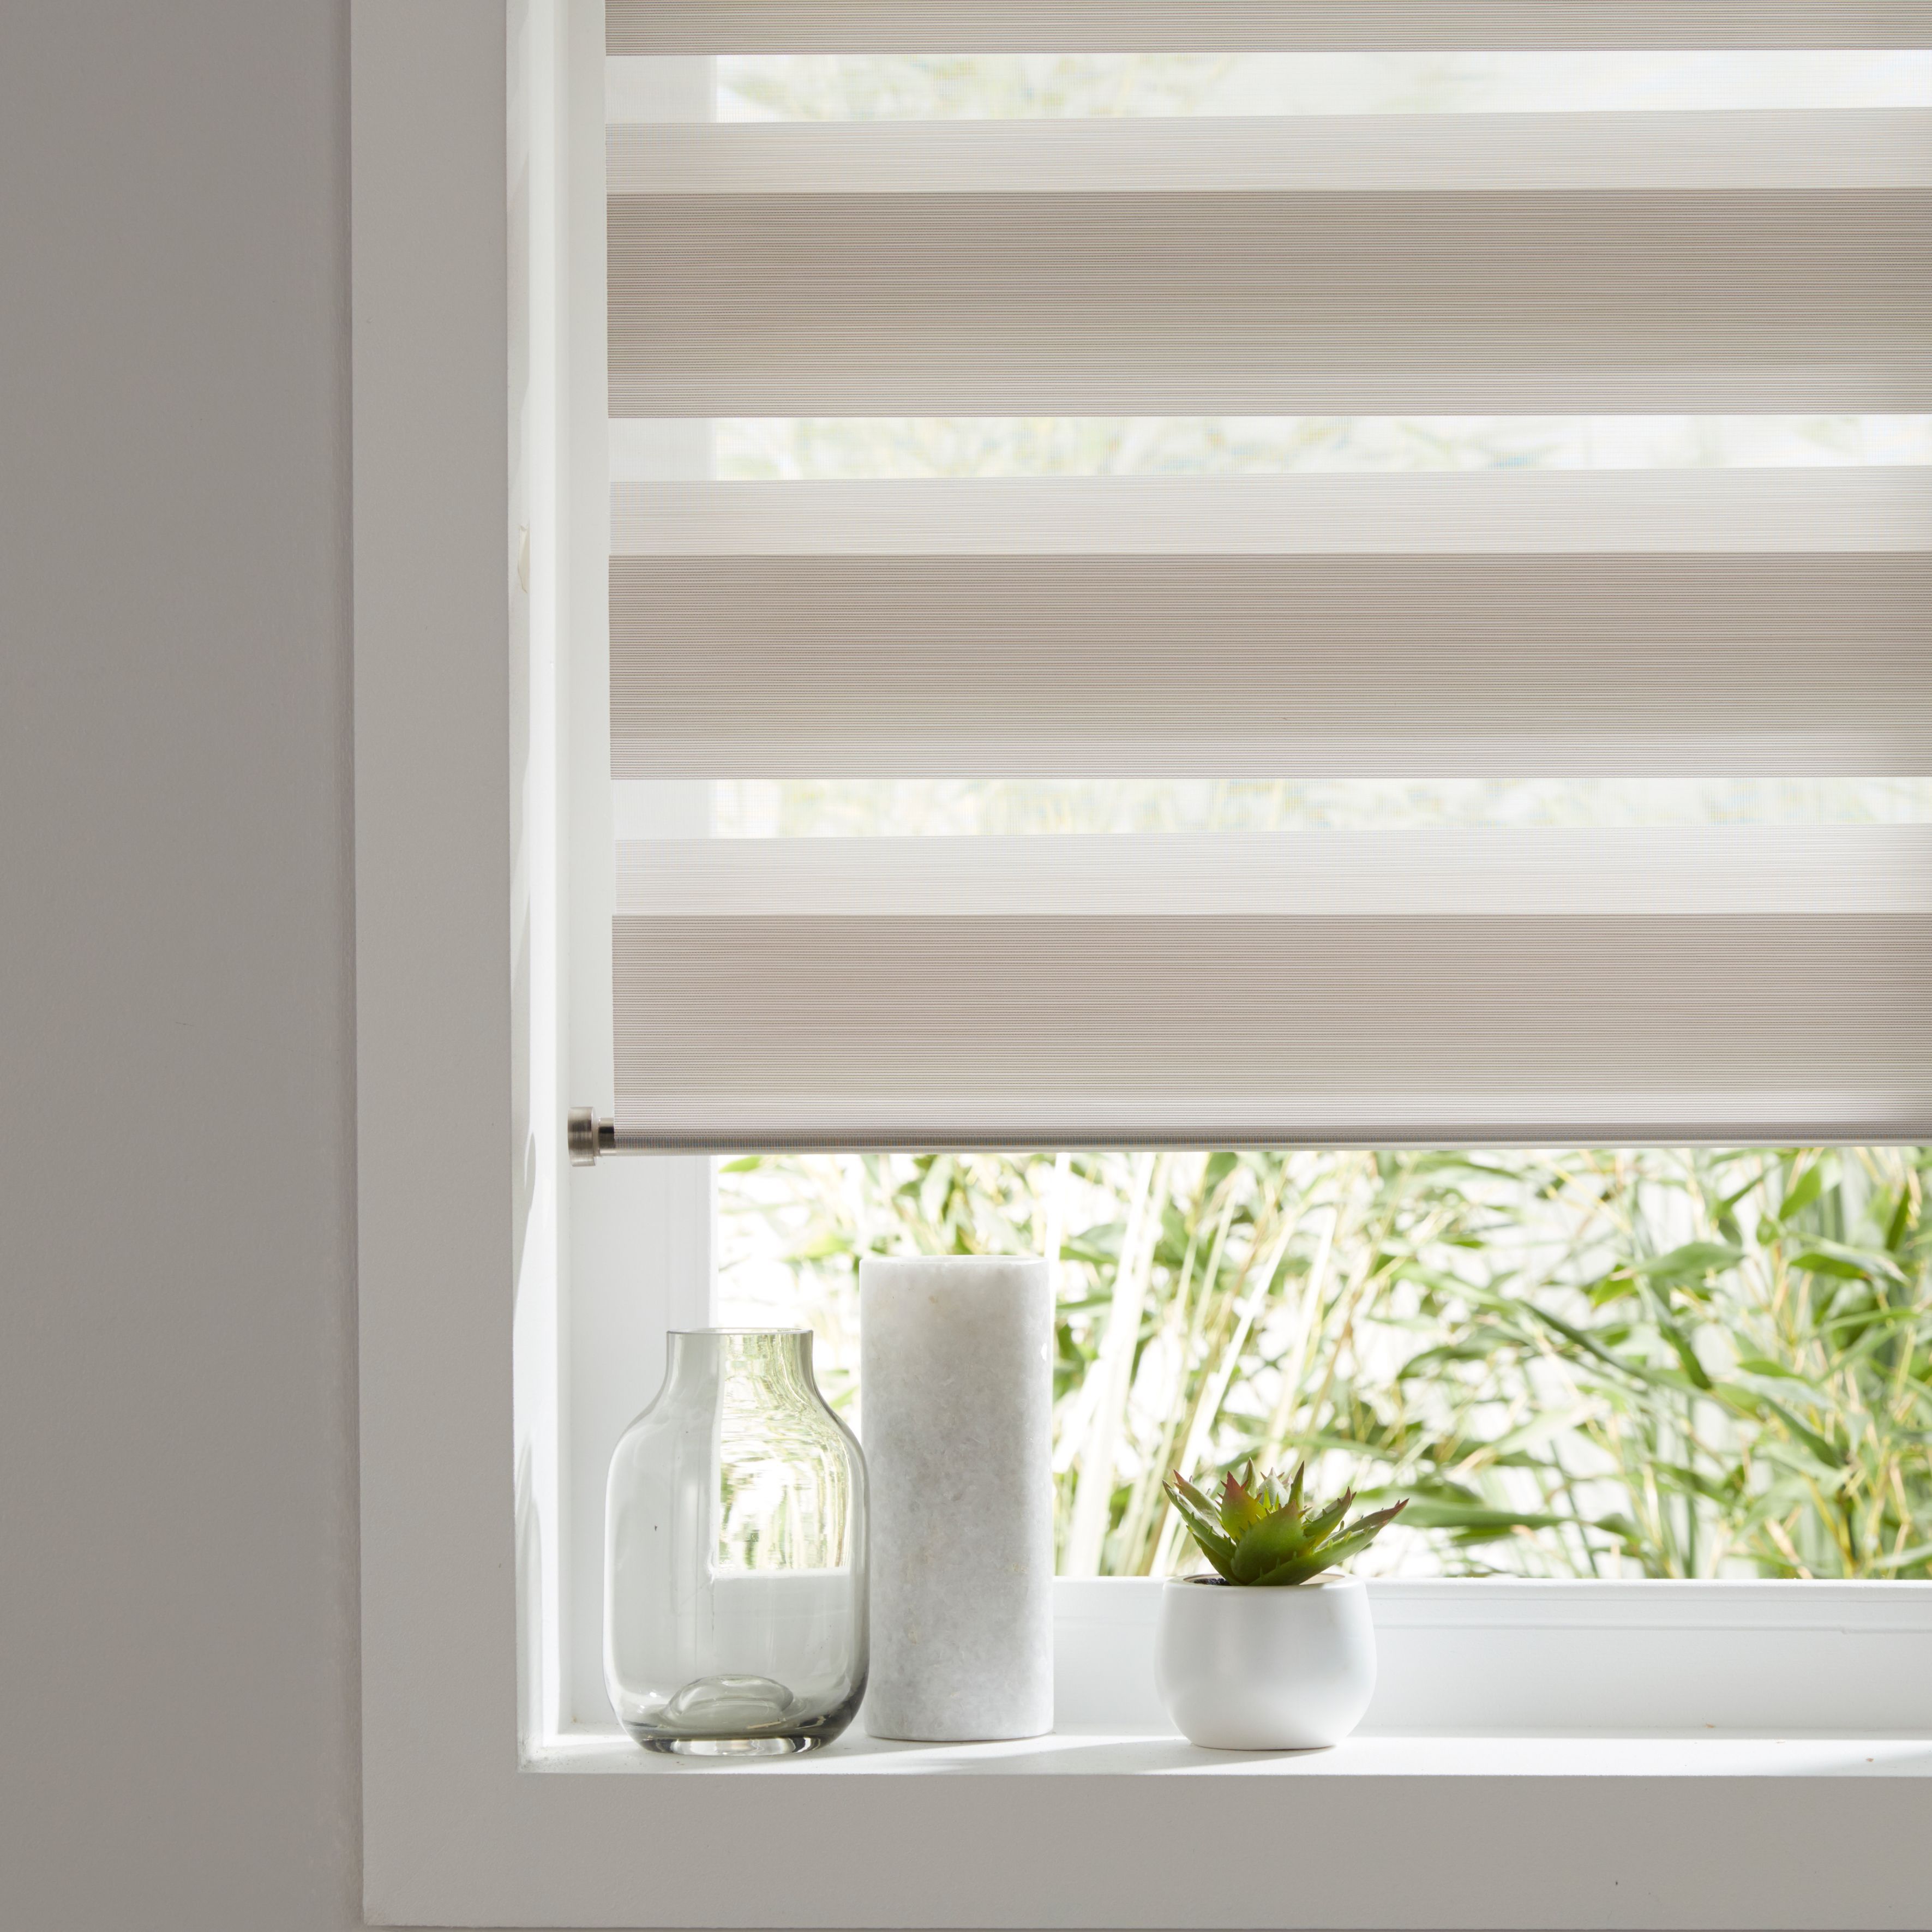 Kala Corded Natural Striped Day & night Roller blind (W)160cm (L)180cm